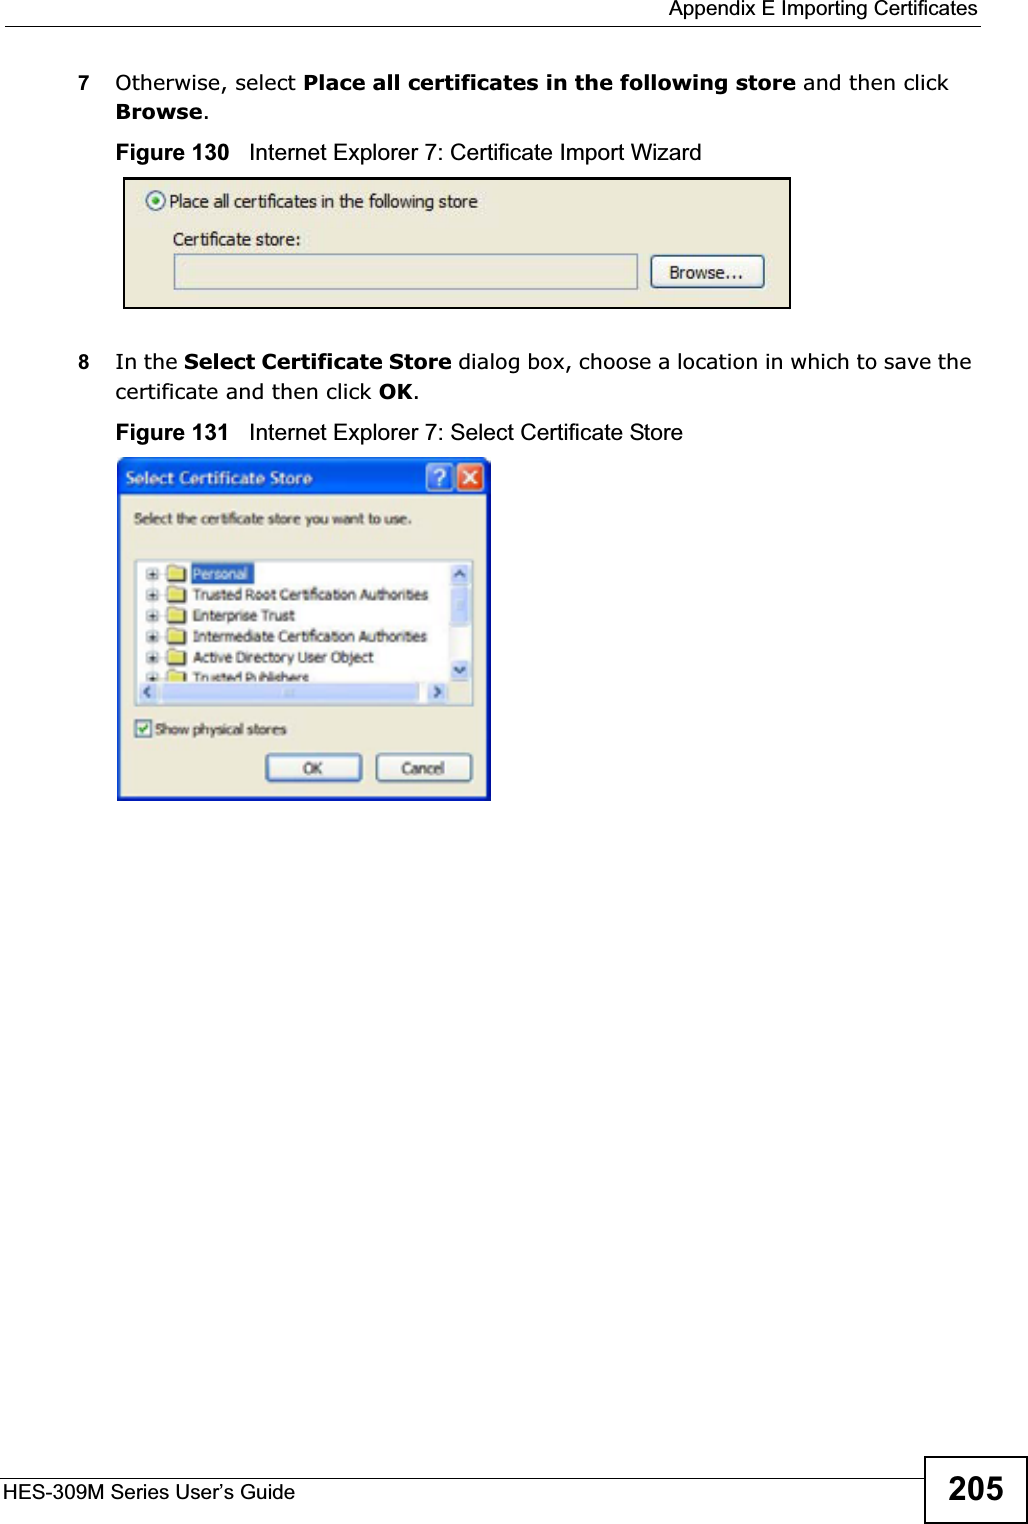  Appendix E Importing CertificatesHES-309M Series User’s Guide 2057Otherwise, select Place all certificates in the following store and then click Browse.Figure 130   Internet Explorer 7: Certificate Import Wizard8In the Select Certificate Store dialog box, choose a location in which to save the certificate and then click OK.Figure 131   Internet Explorer 7: Select Certificate Store